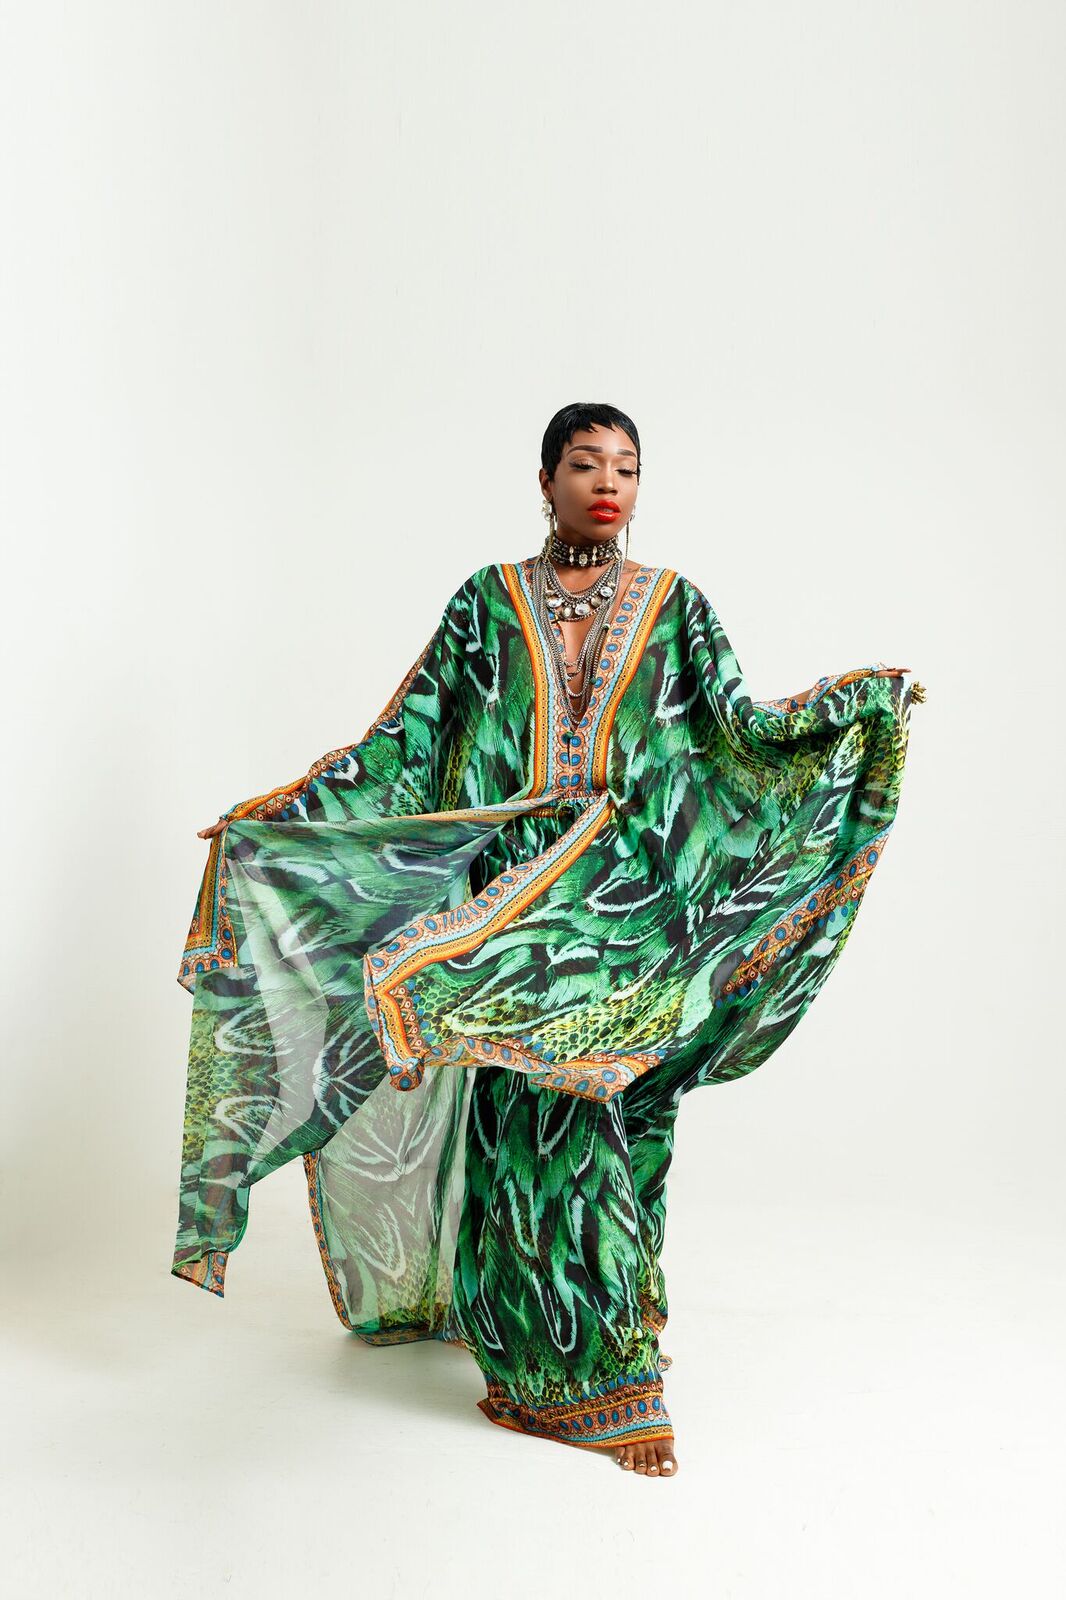 Sai Sankoh Just Launched Her Womenswear Label and It’s As Fabulous As You’d Expect!